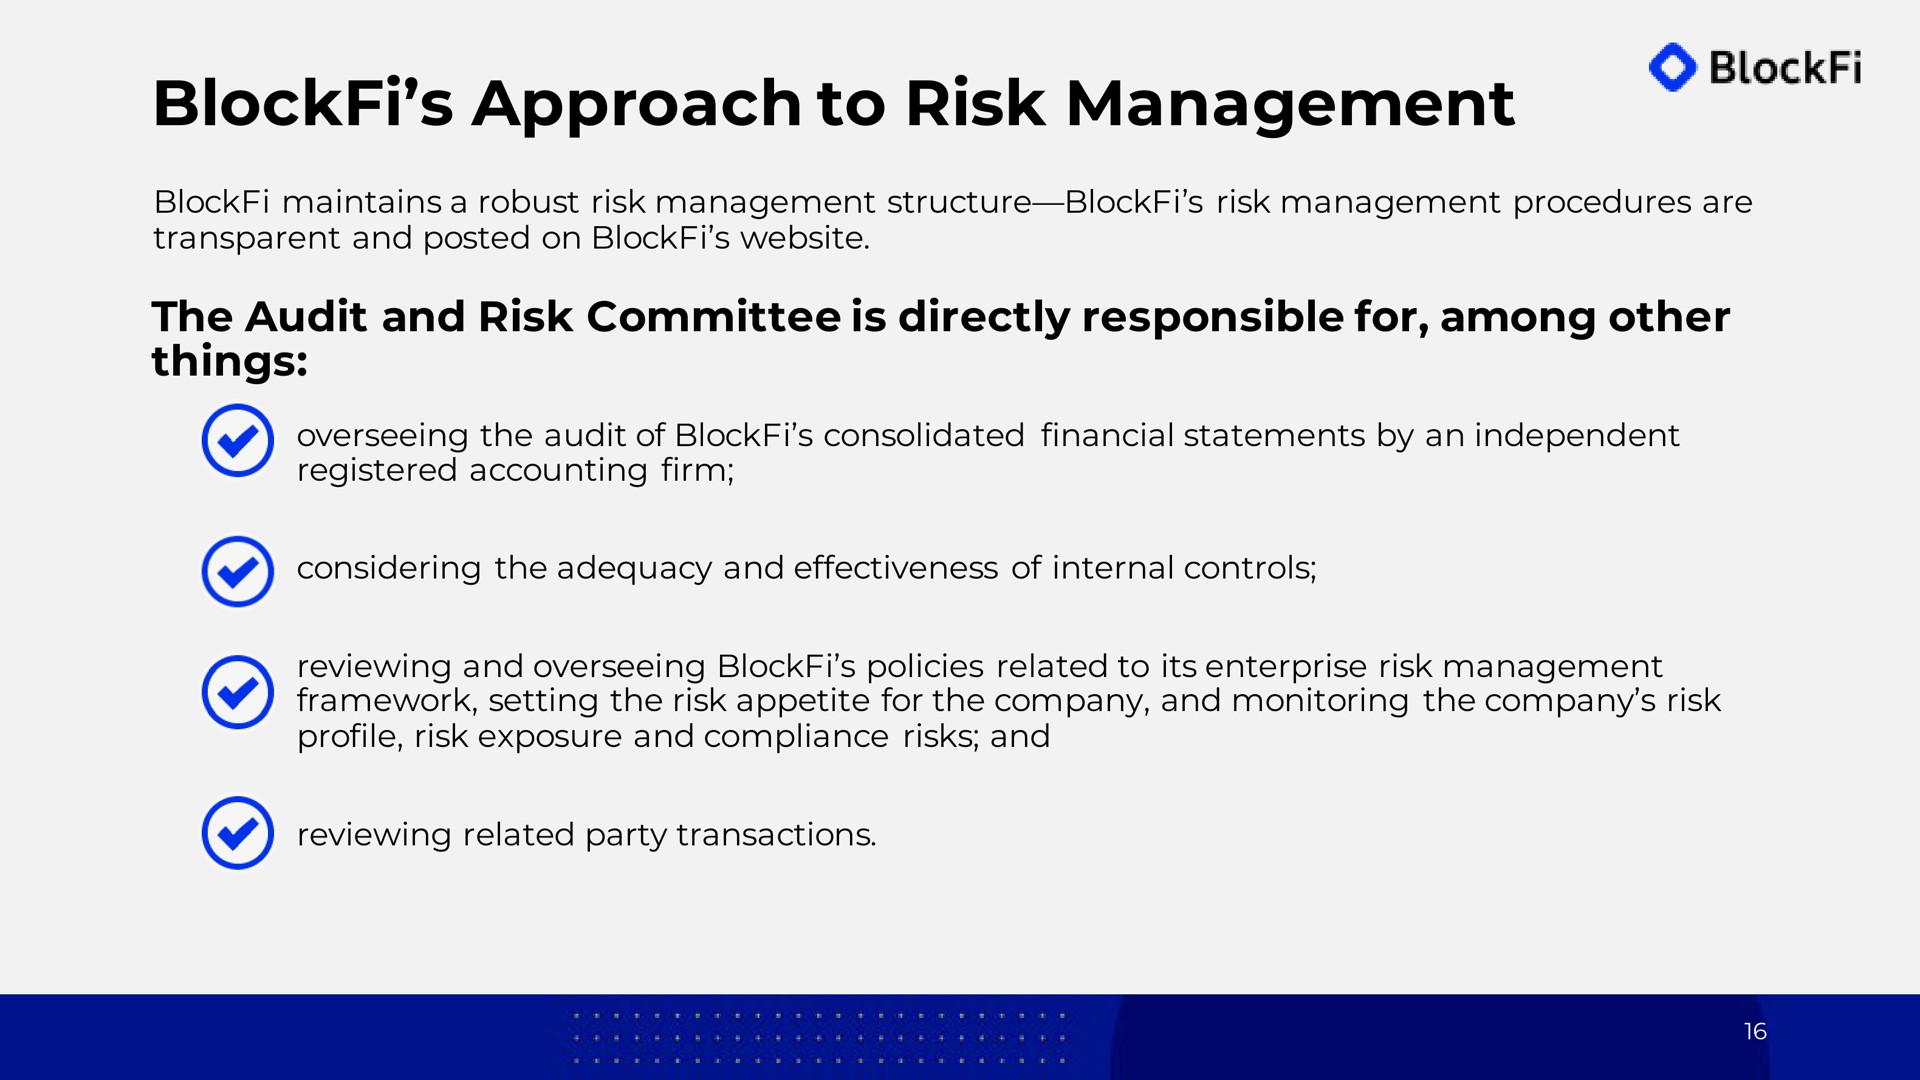 approach to risk management the audit and risk committee is directly responsible for among other things | BlockFi